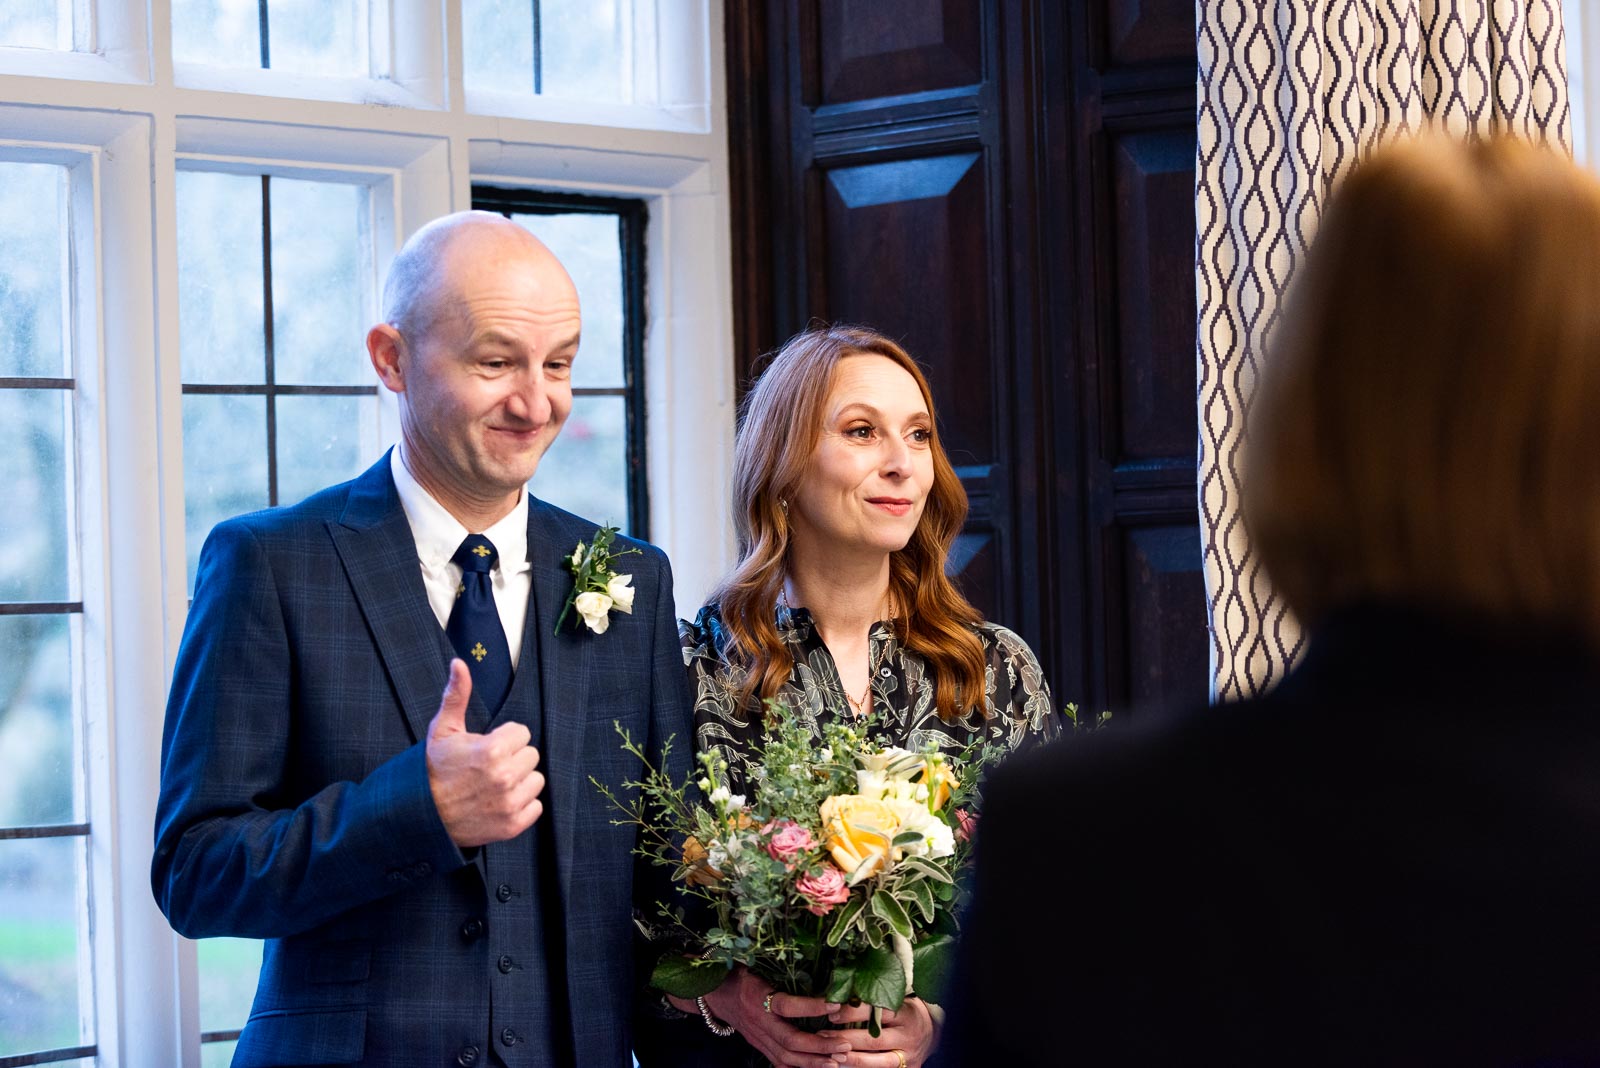 Melanie and Ryan enjoy a funny moment at their ceremony in the Evelyn Room at Lewes Register Office.